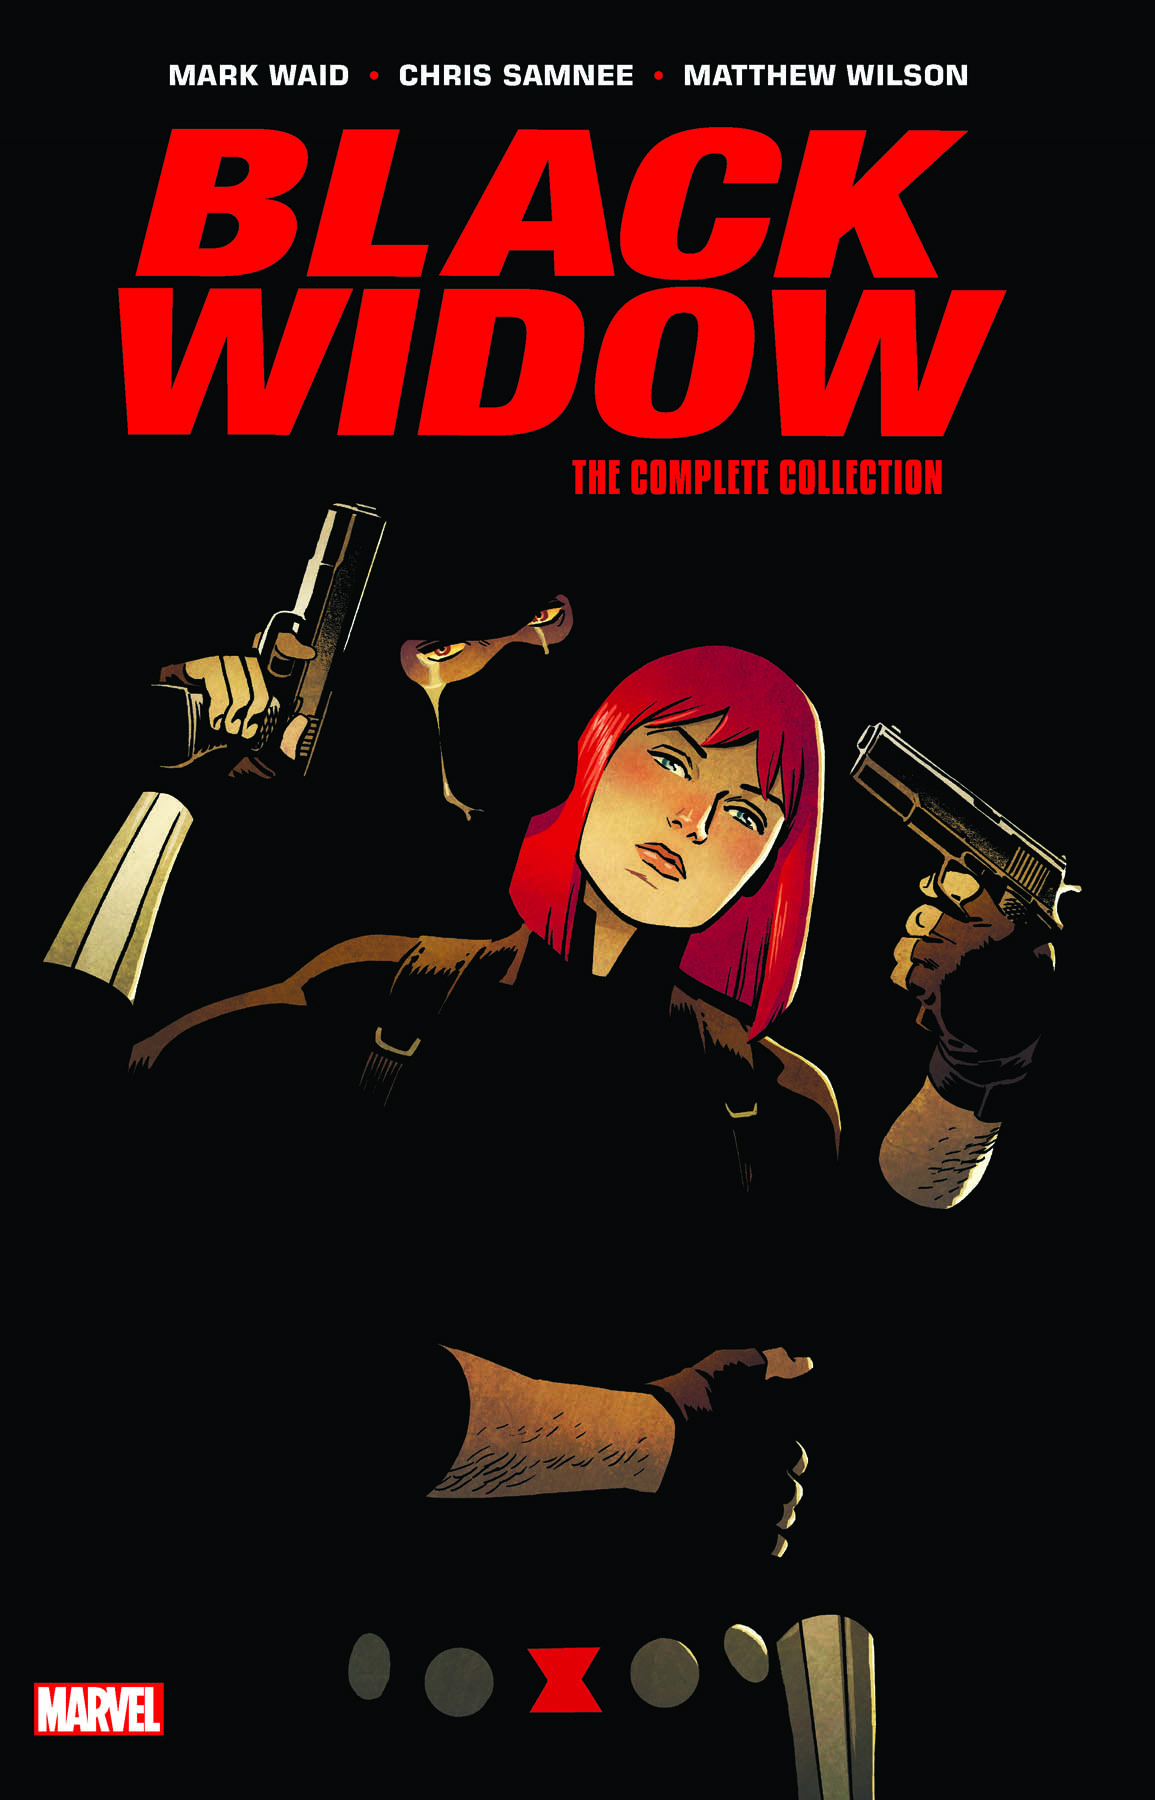 Black Widow by Waid & Samnee: The Complete Collection (Trade Paperback)